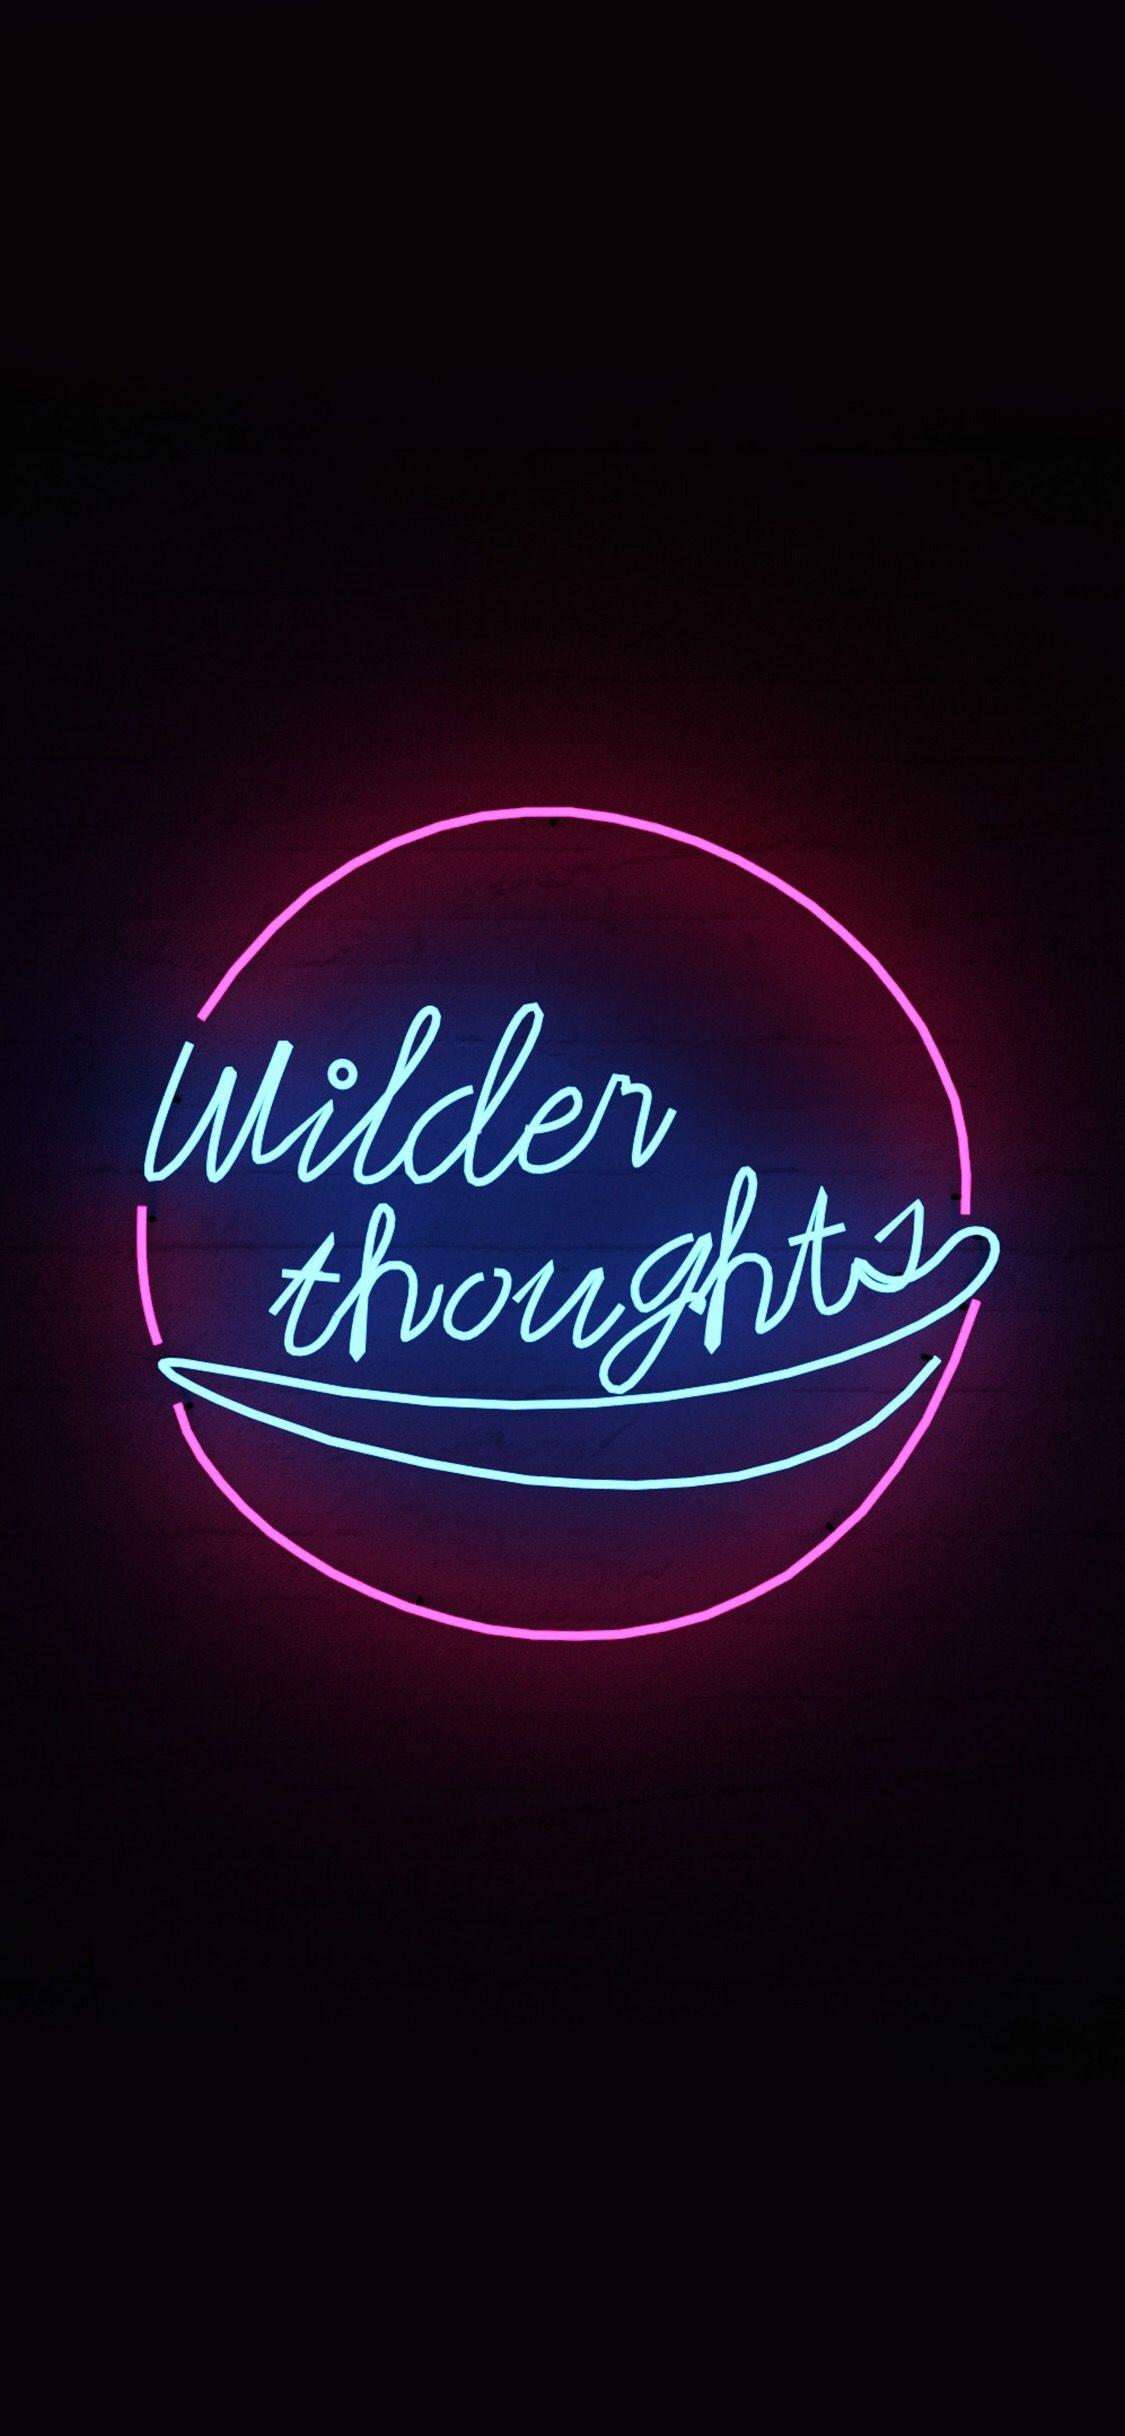 Aesthetic Grunge Neon Signs Wallpaper Free Aesthetic